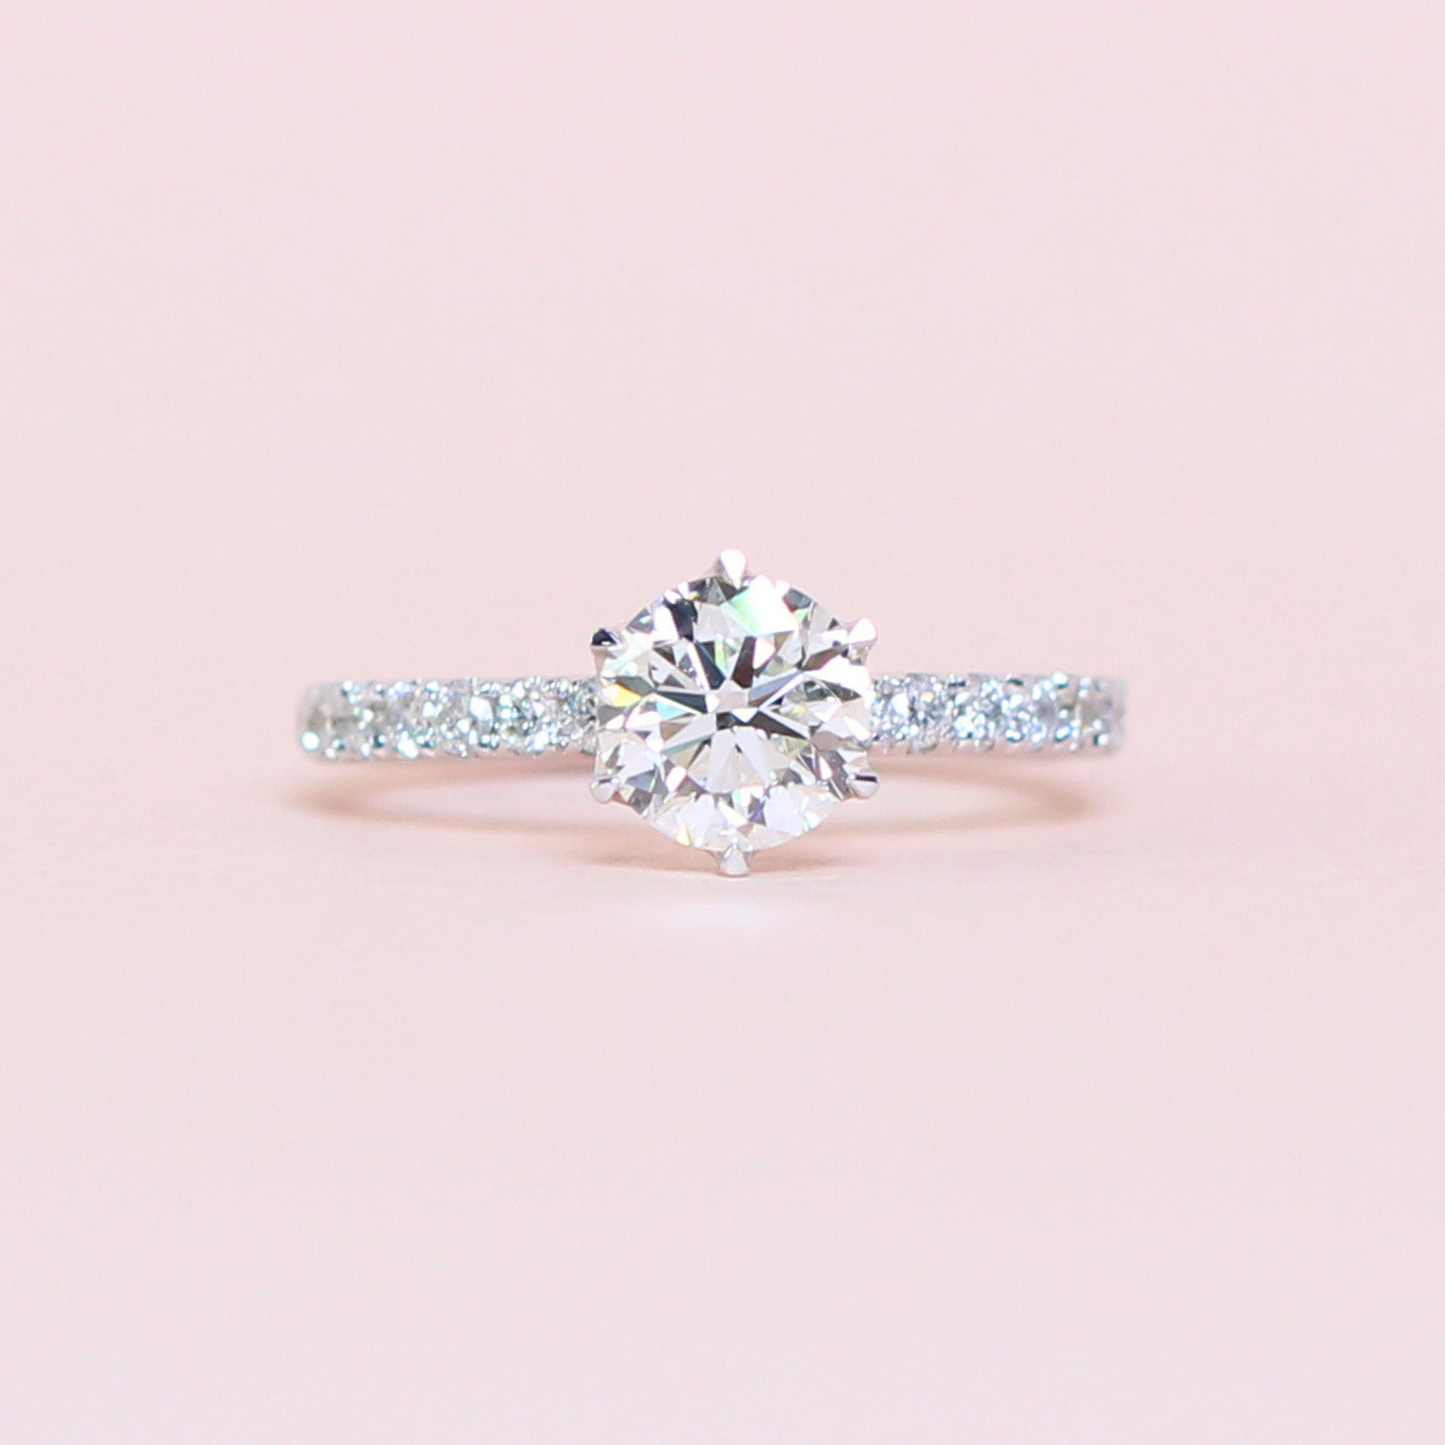 1ct Round Diamond ring in high petal prong pave setting